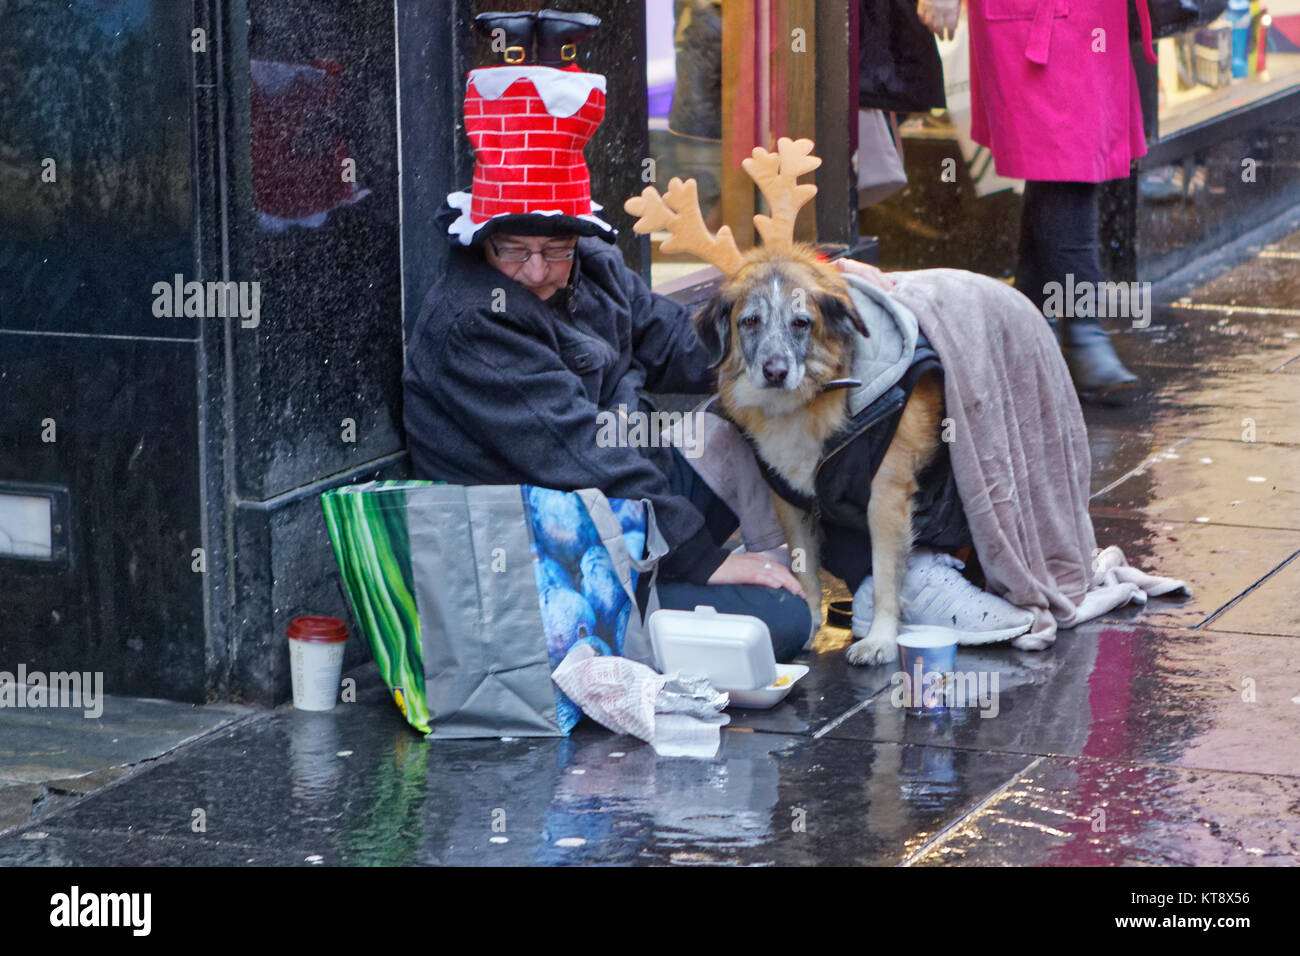 Glasgow, Scotland, 22nd December. Homelessness at Christmas now a tourist attraction in the city with the new world famous homeless Jesus statue in Nelson Mandela place and the new theatrics of beggars. Credit: gerard ferry/Alamy Live News Stock Photo